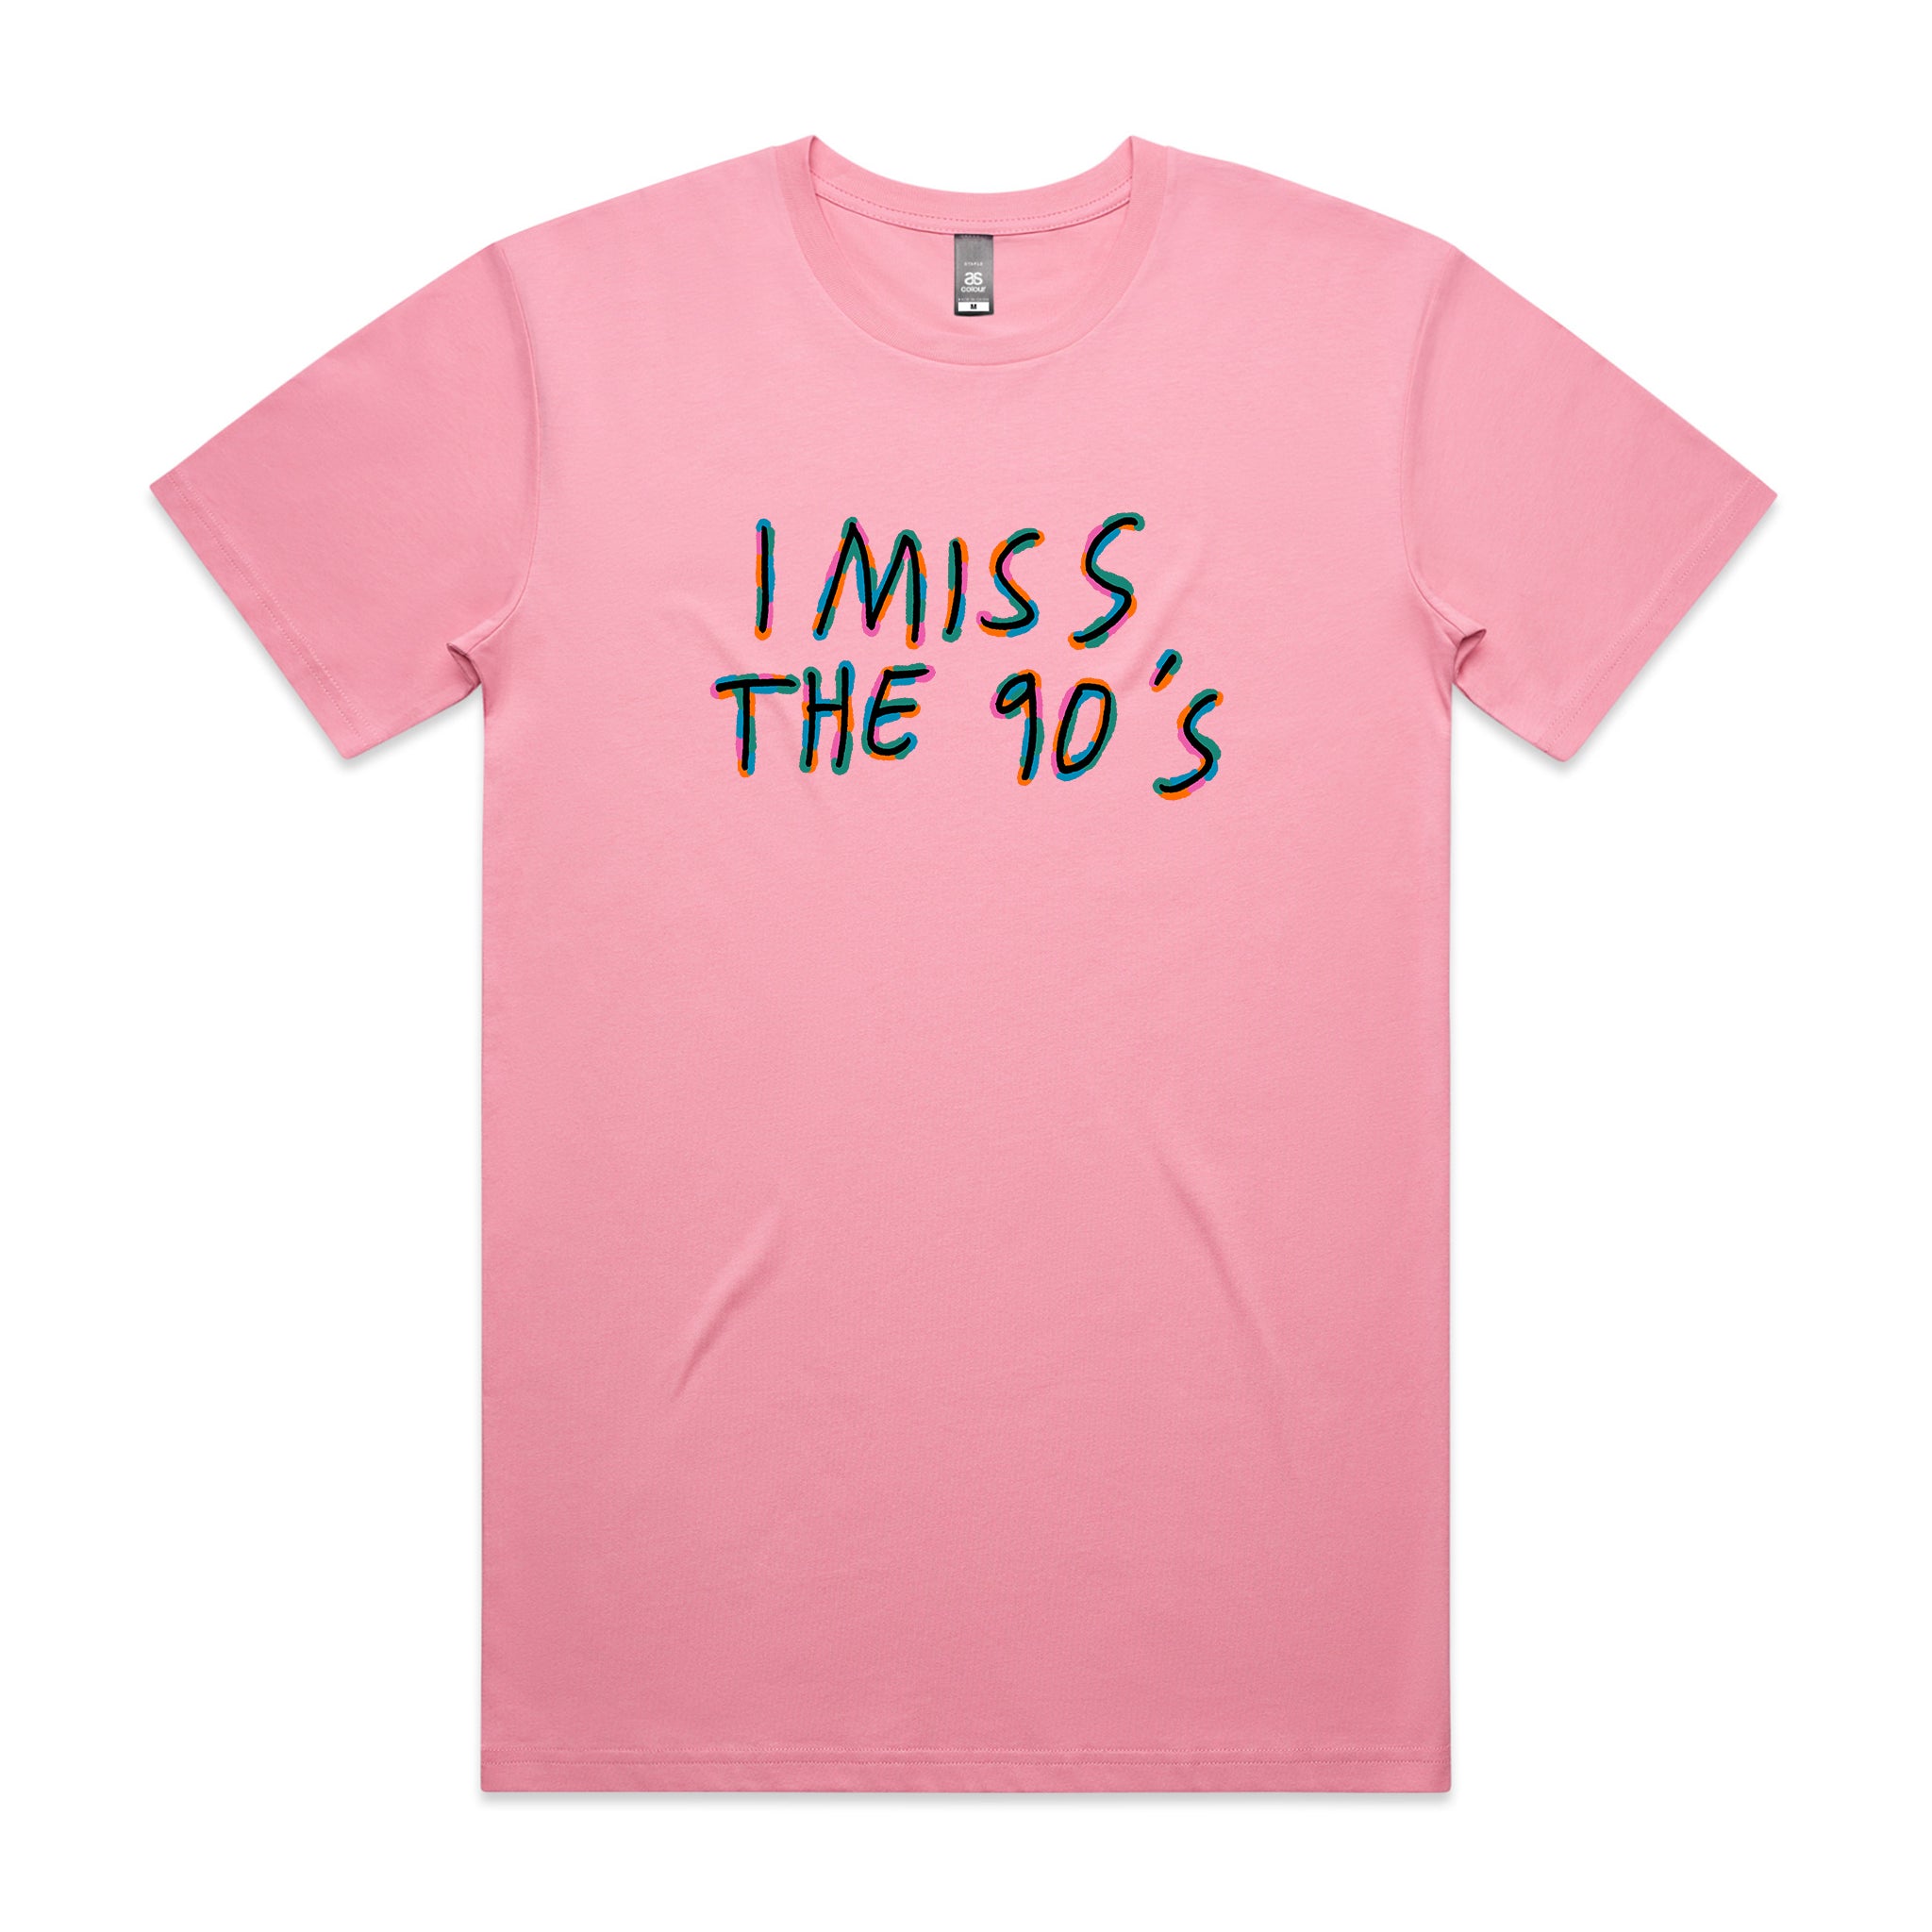 I Miss The 90s Tee